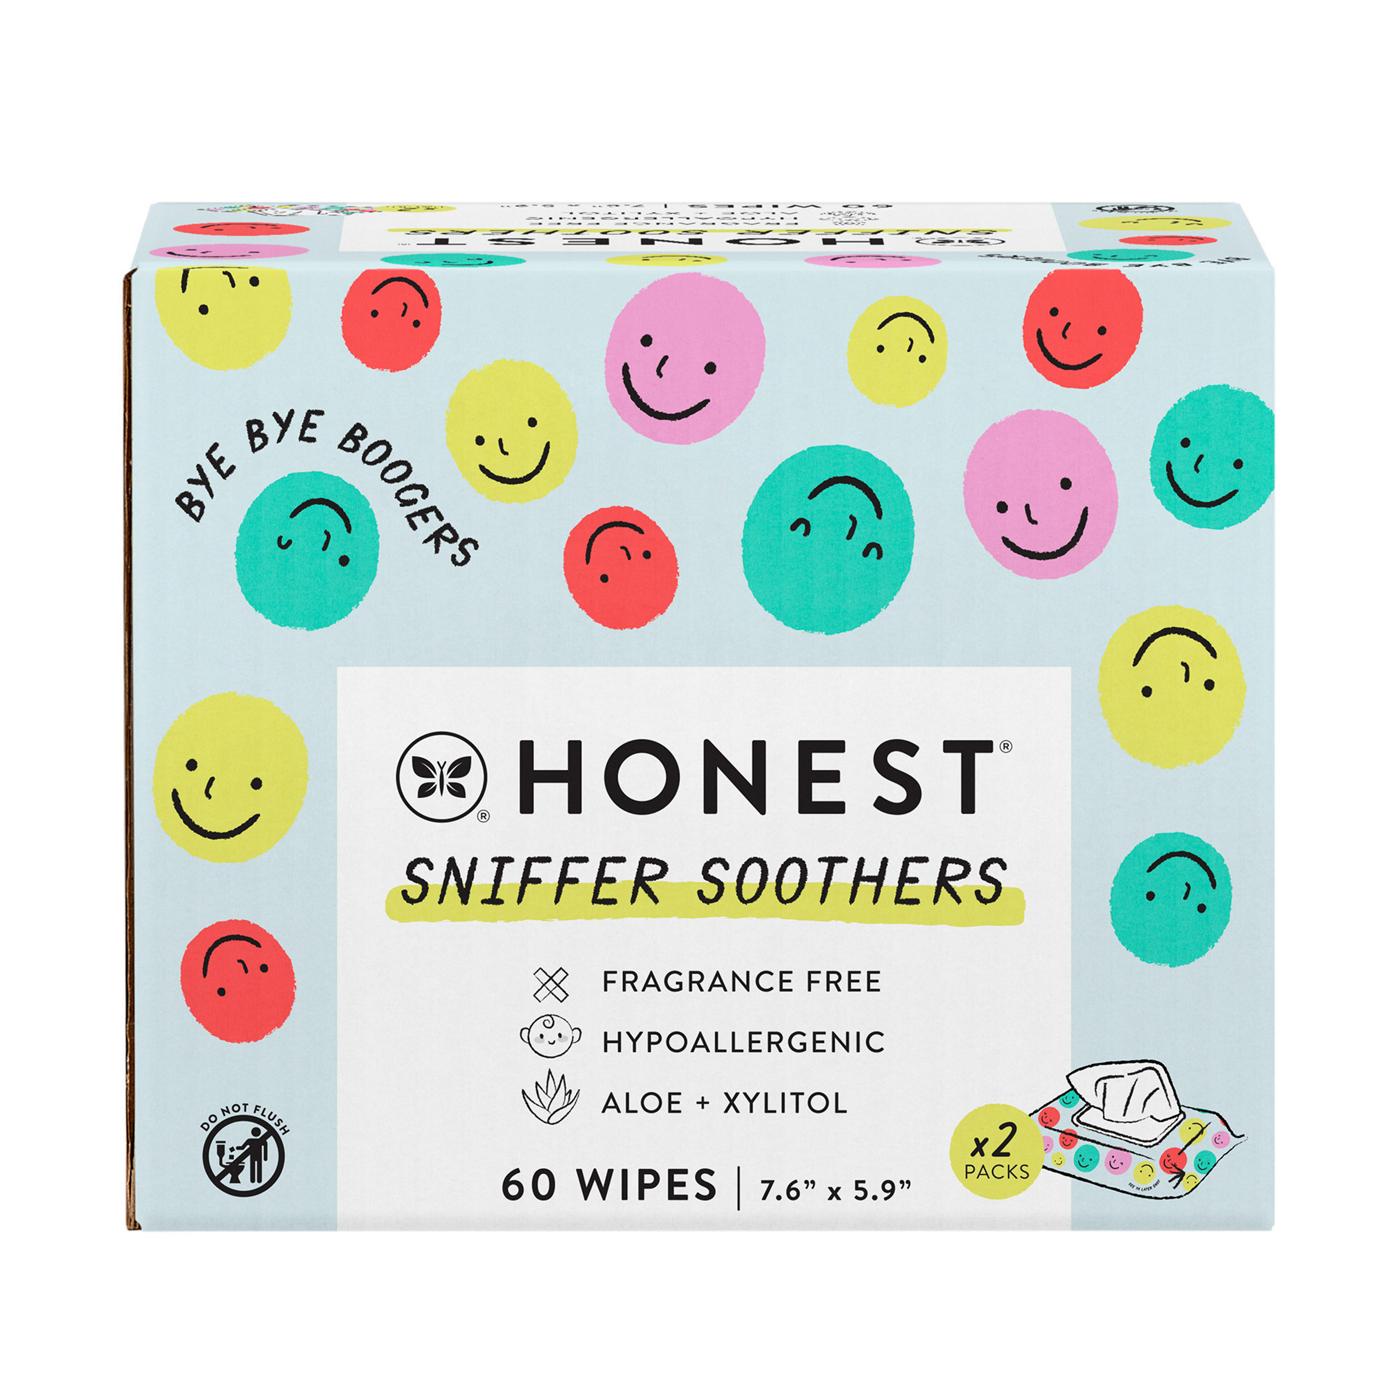 The Honest Company Sniffer Soothers Wipes; image 1 of 5